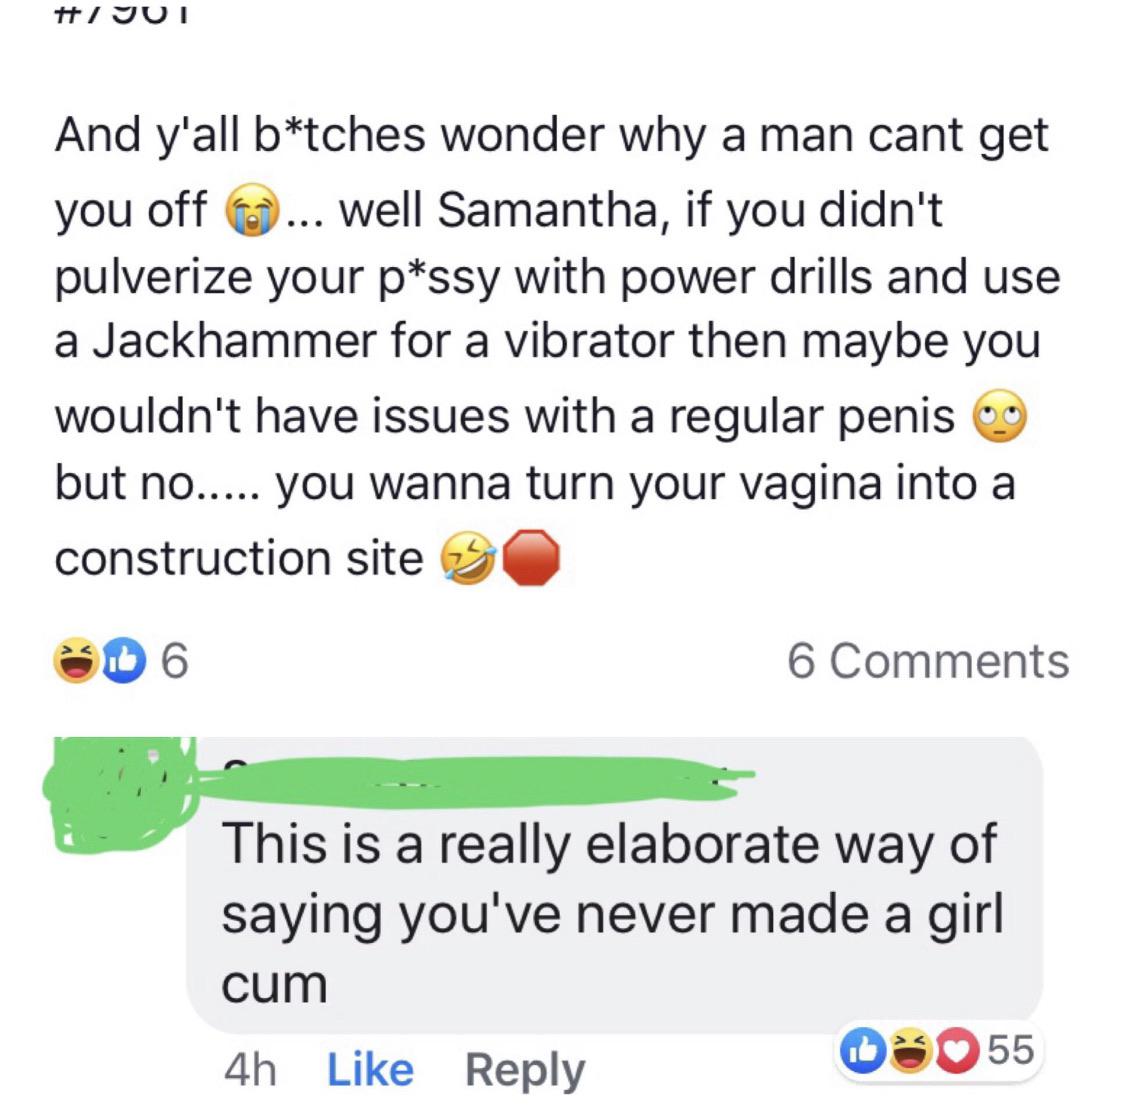 point - Hi Jut And y'all btches wonder why a man cant get you off ... Well Samantha, if you didn't pulverize your pssy with power drills and use a Jackhammer for a vibrator then maybe you wouldn't have issues with a regular penis 9 but no..... you wanna t